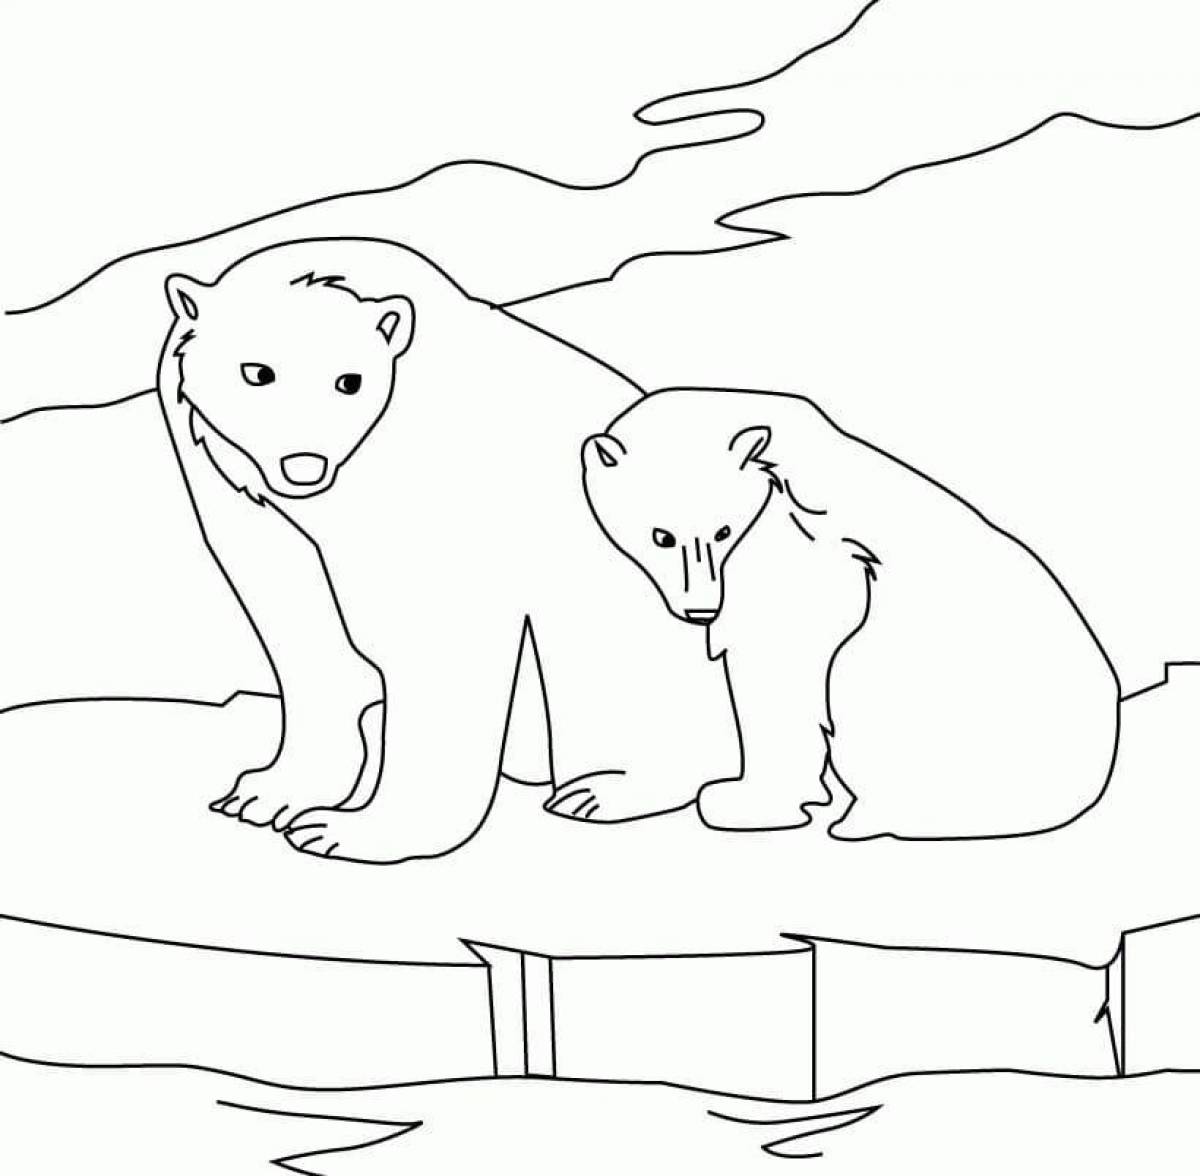 Adorable polar bear coloring pages for kids